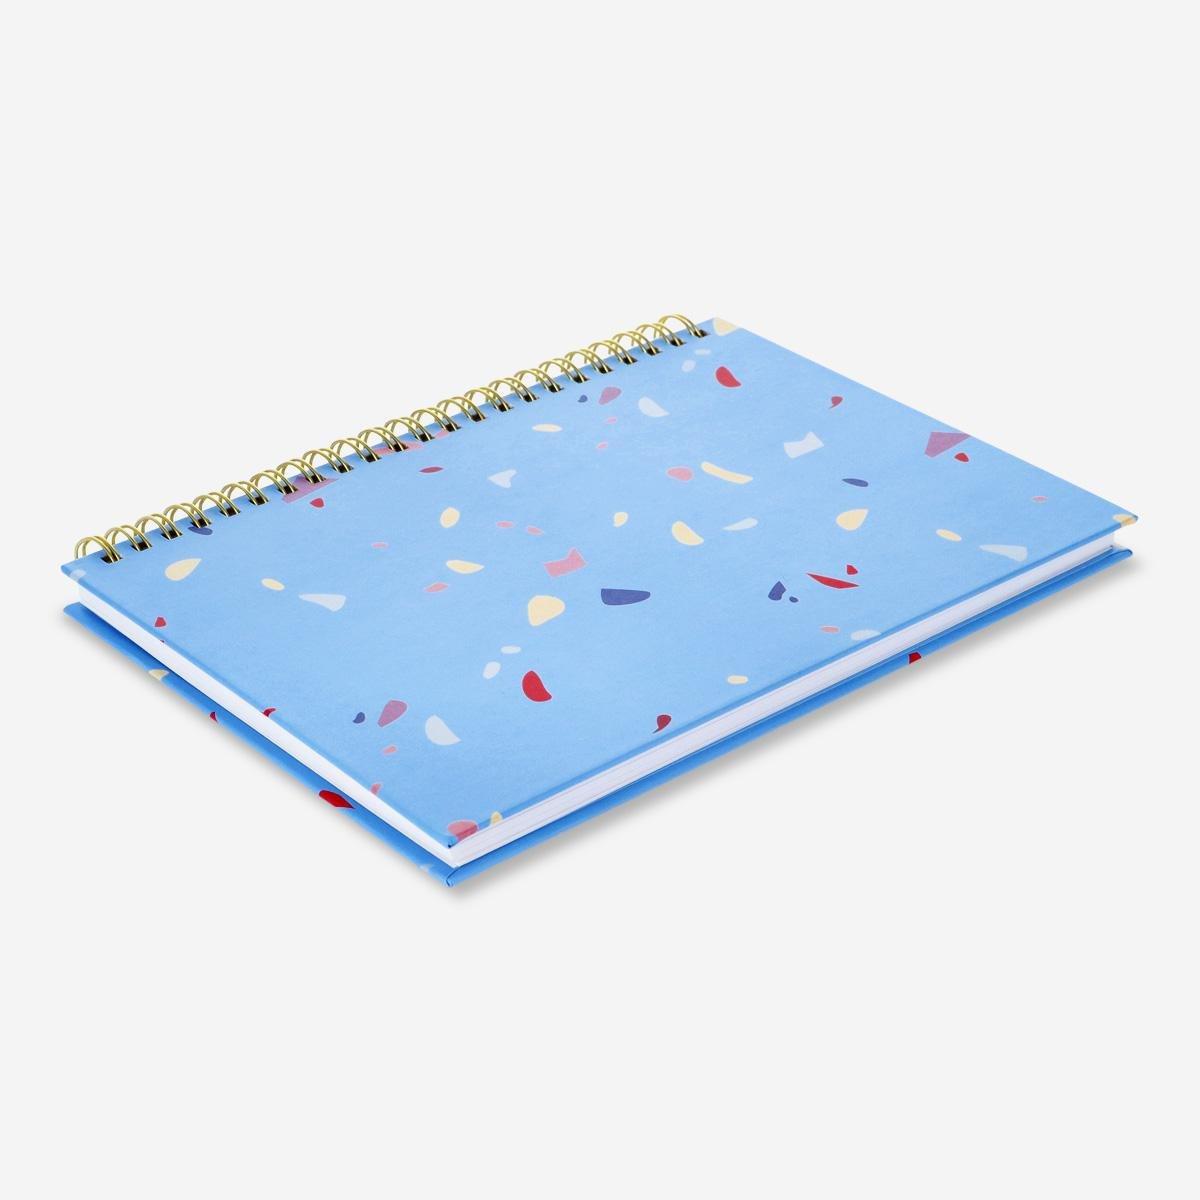 Blue notebook with writing utensils. a5